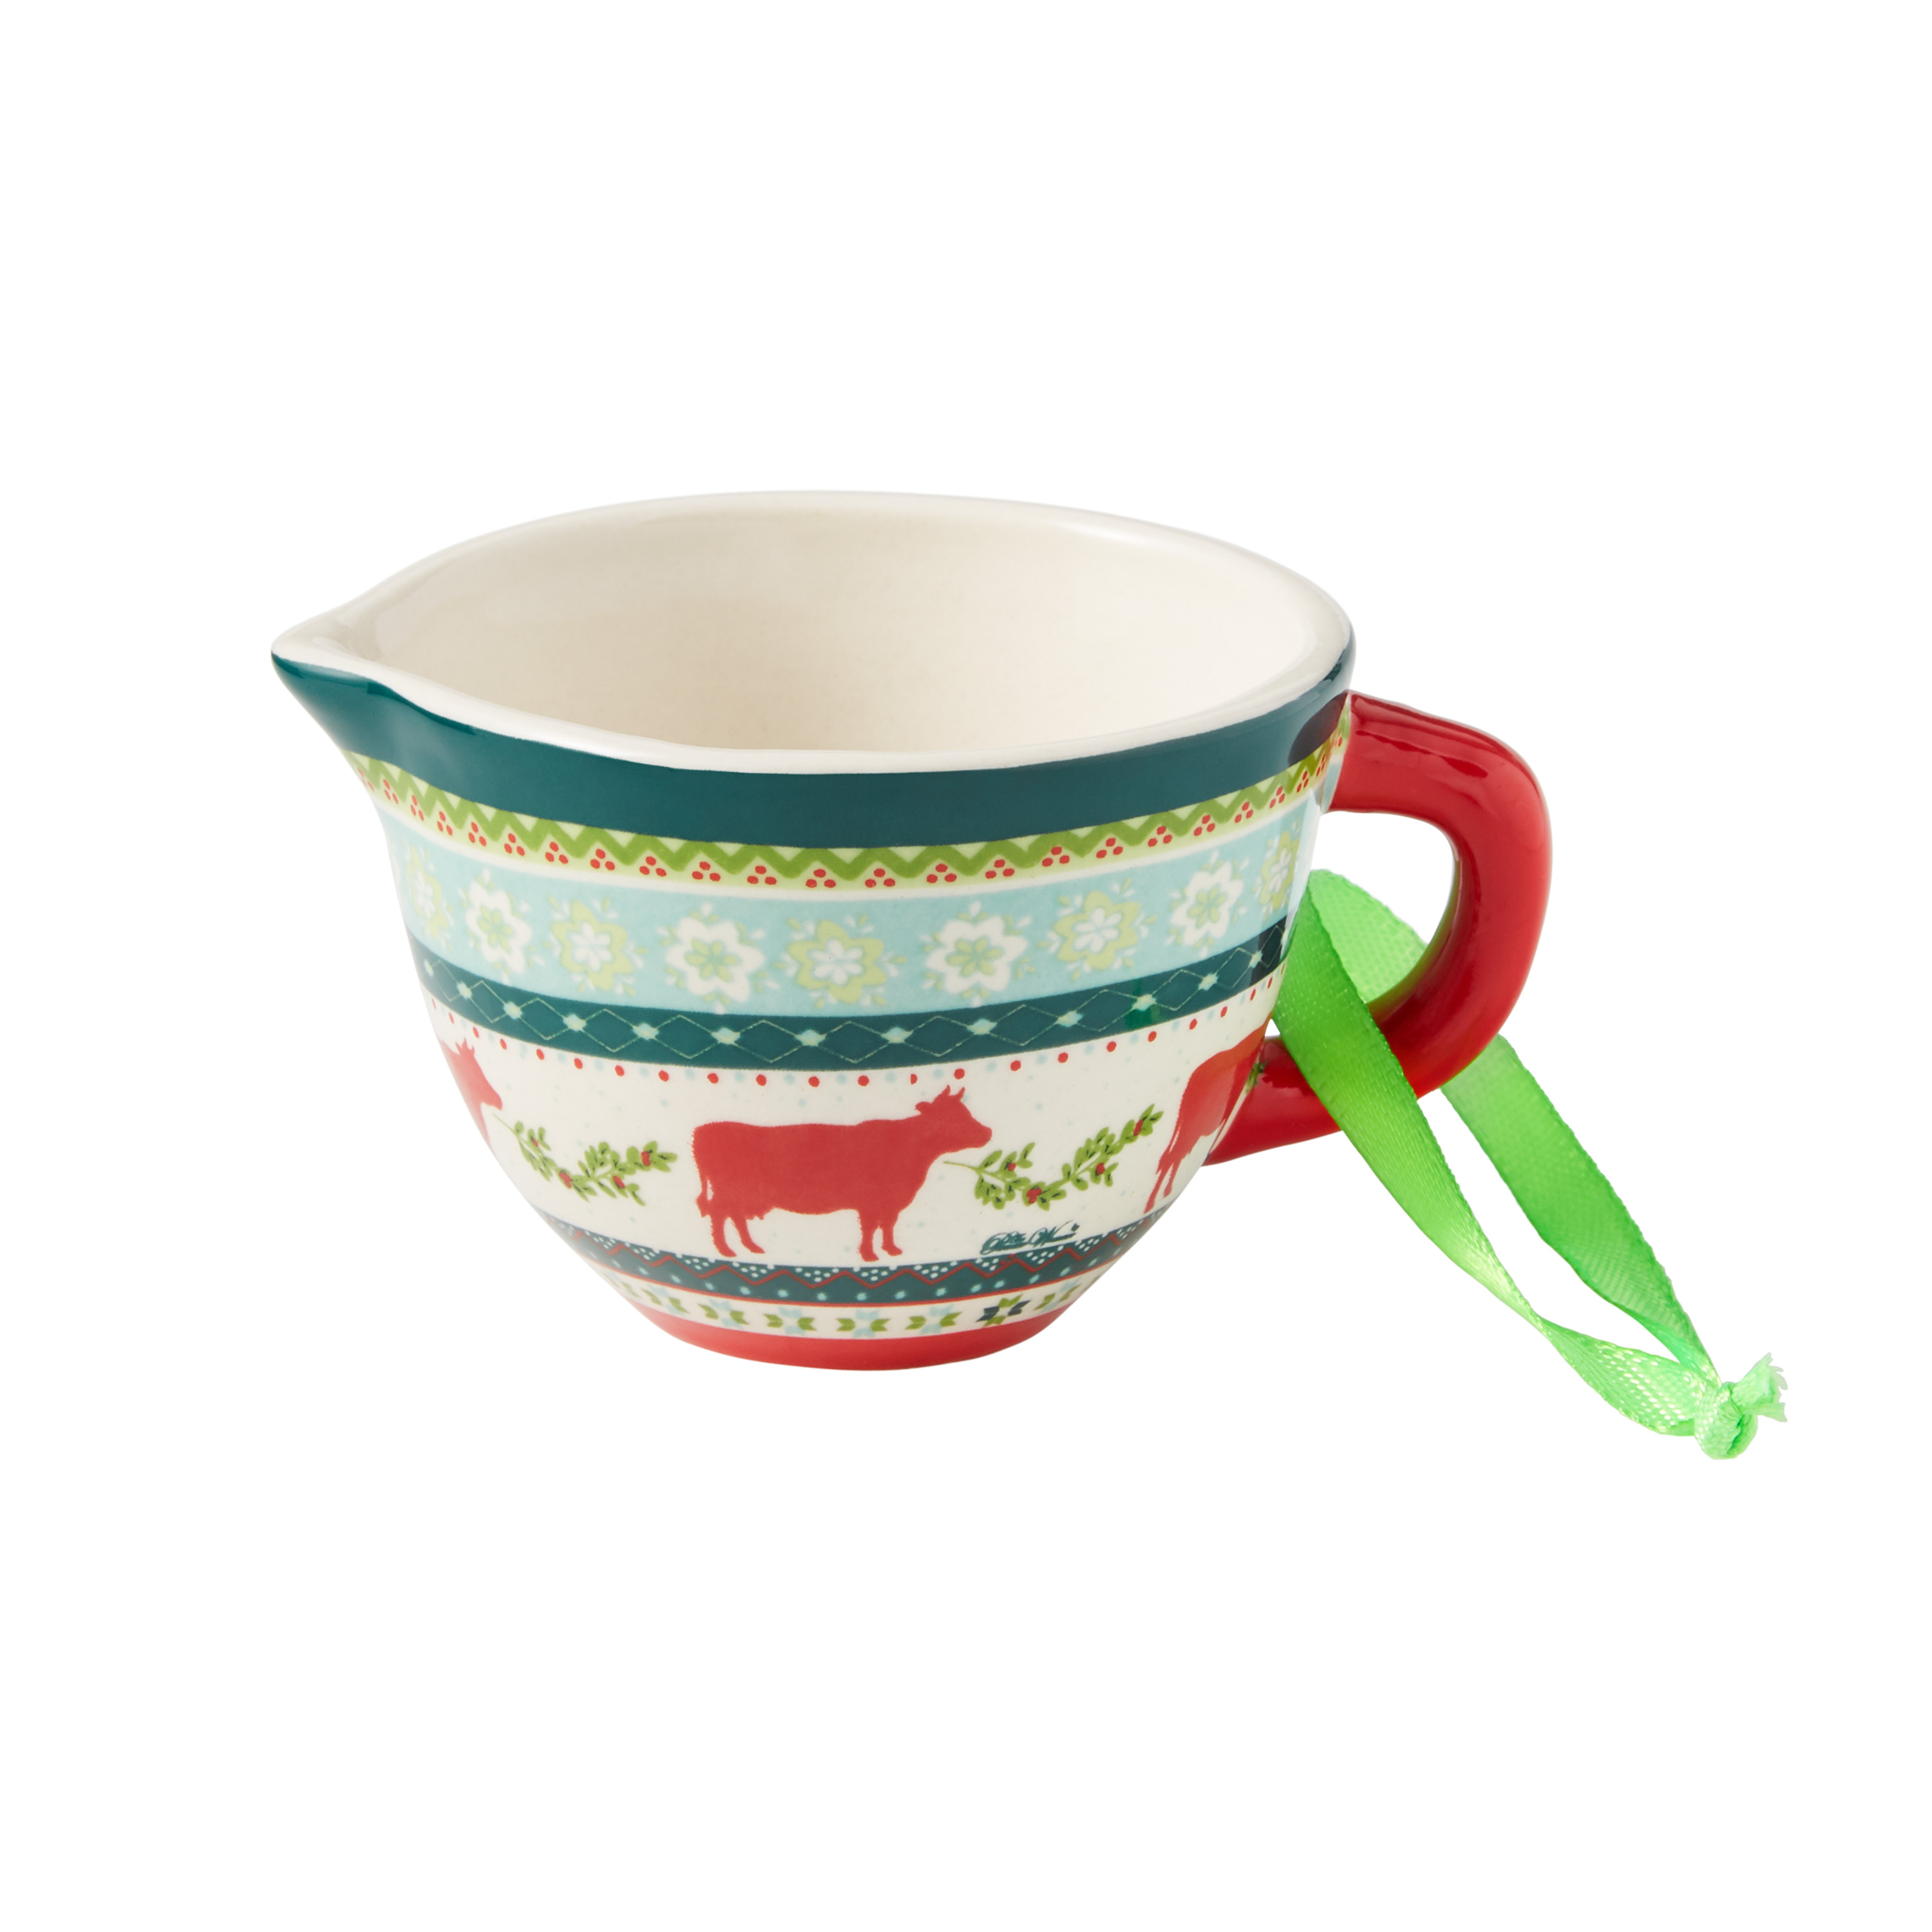 The Pioneer Woman Cups and Bowls 3-Piece Ornament Bundle - image 3 of 5